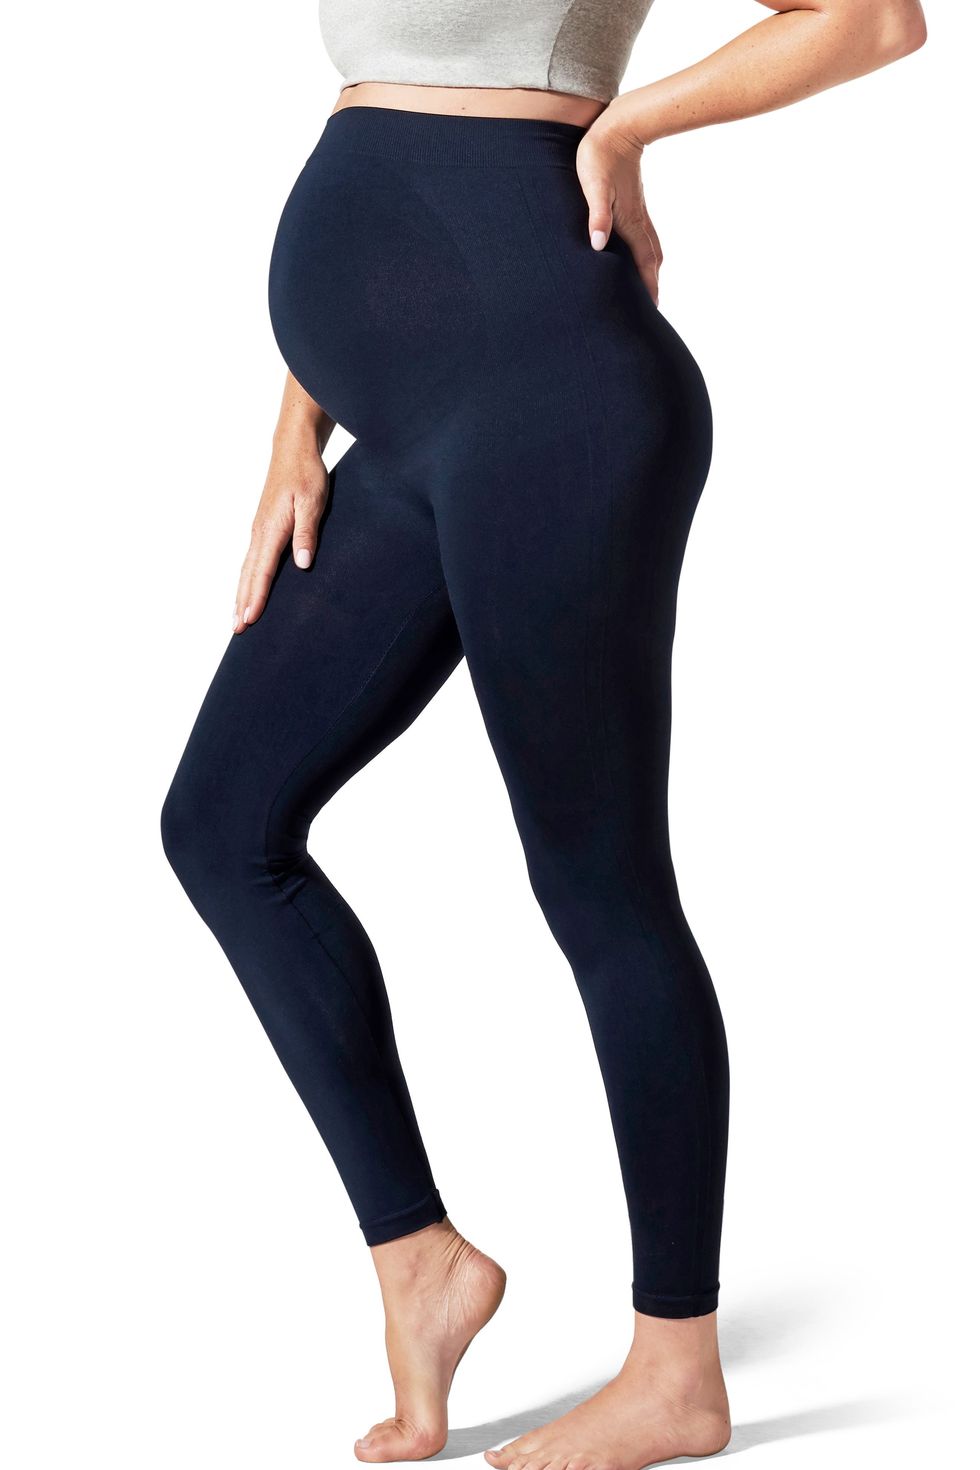 Absolute Support Opaque Maternity Compression Leggings - Firm